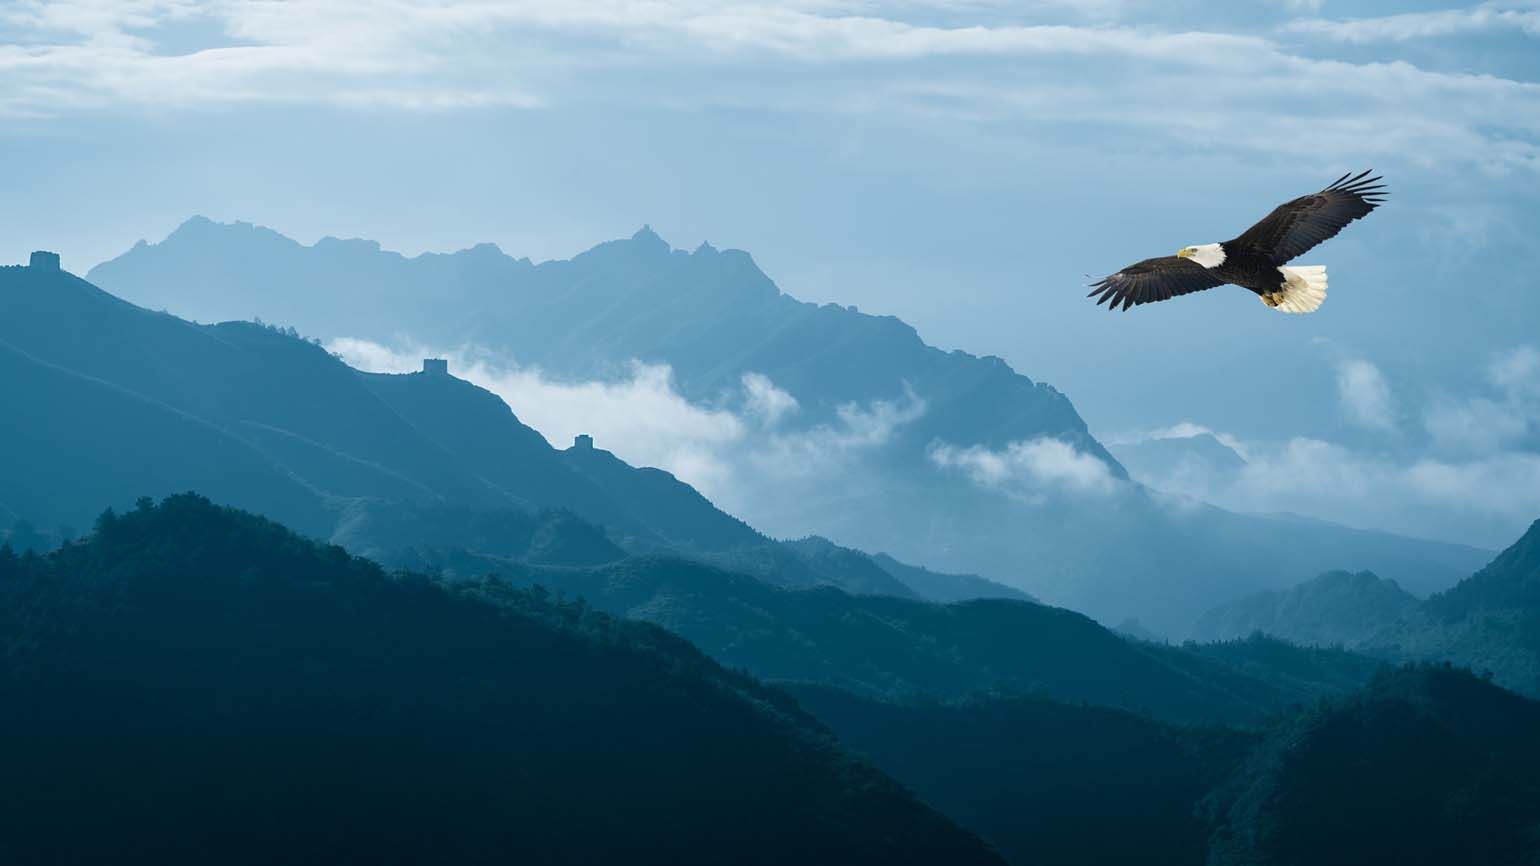 A bald eagle flying over mountains; Getty Images